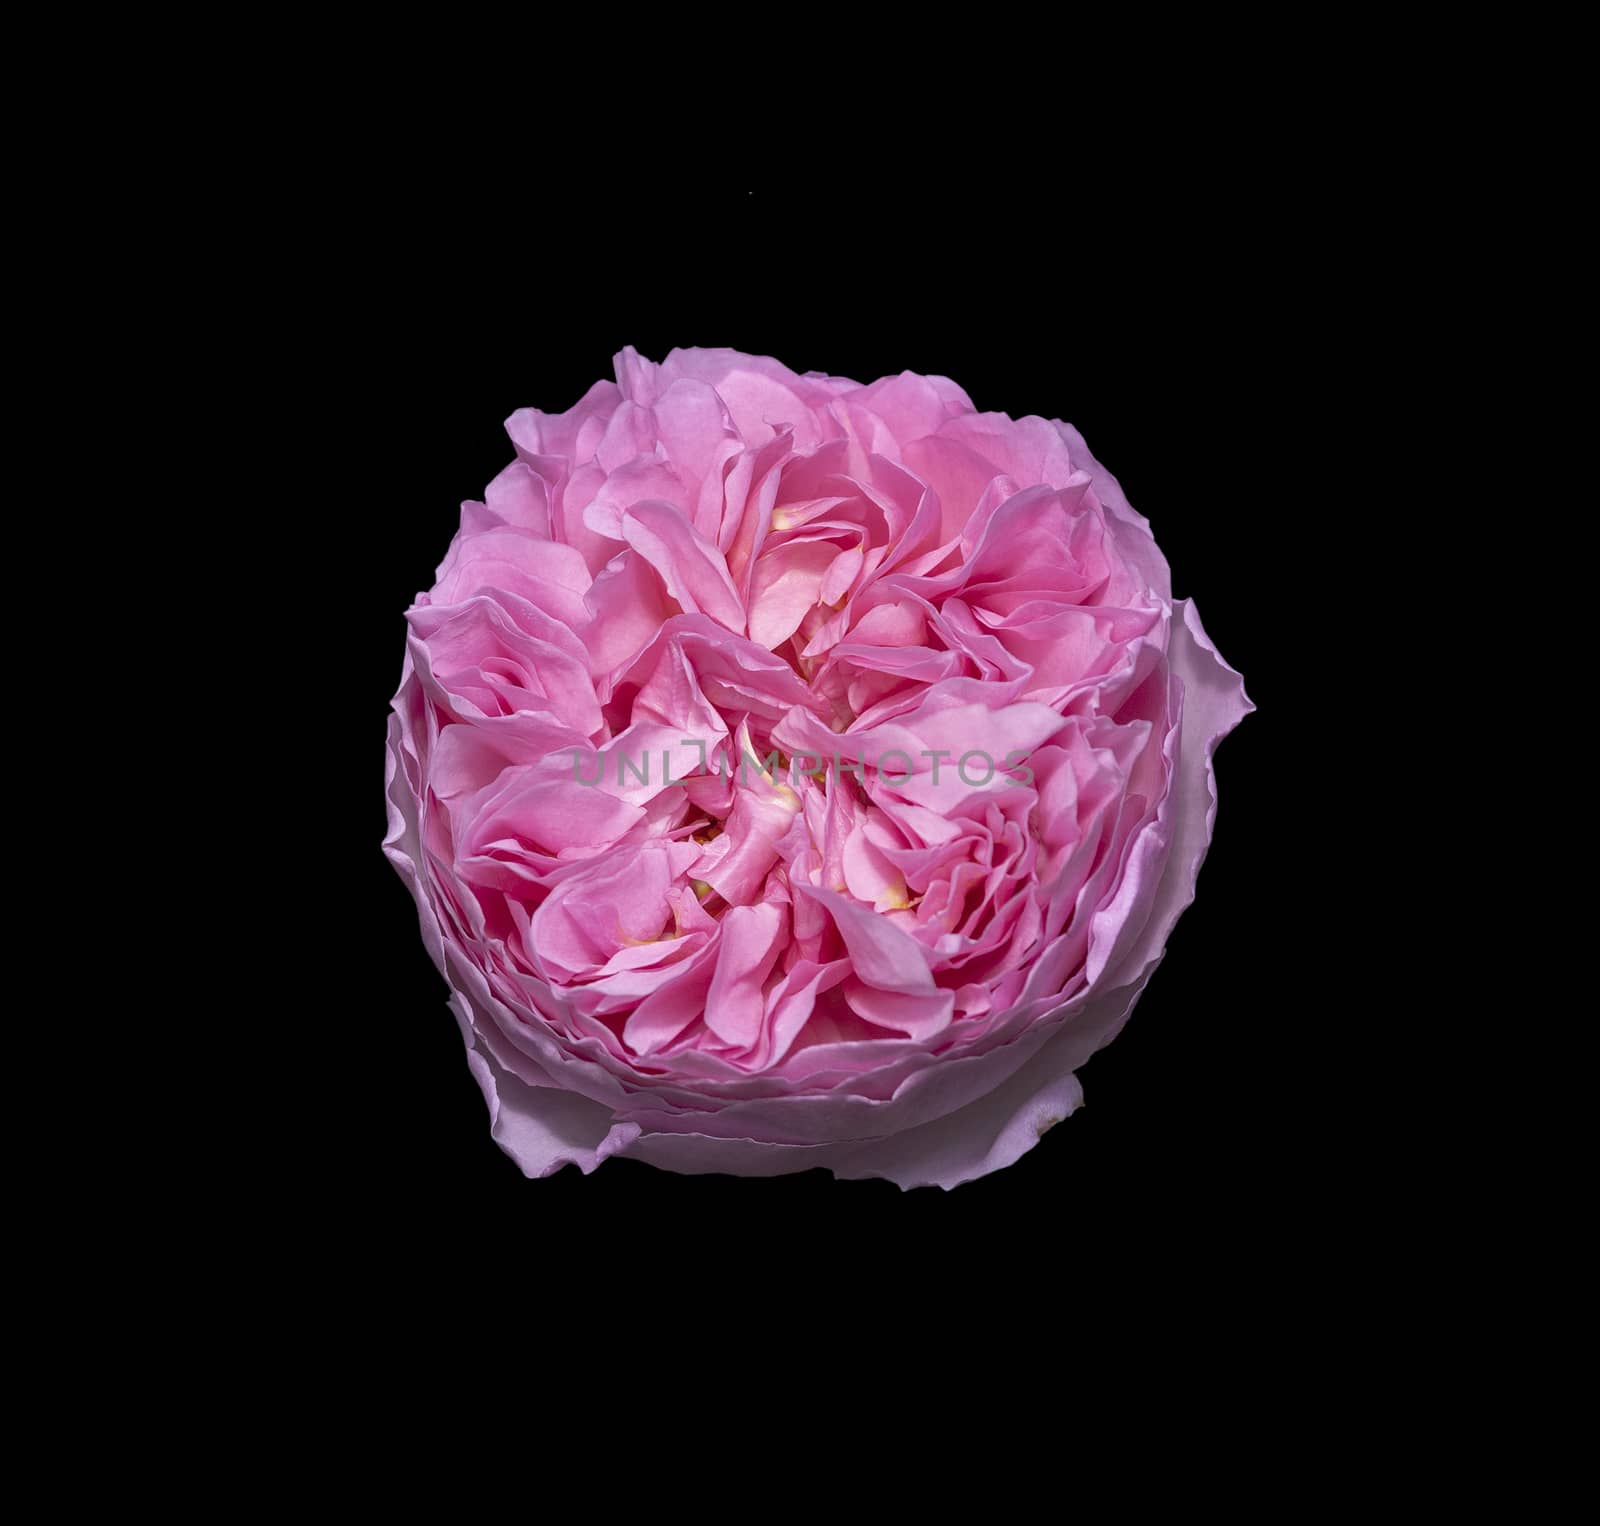 Beautiful pink double rose flower closeup isolated on black